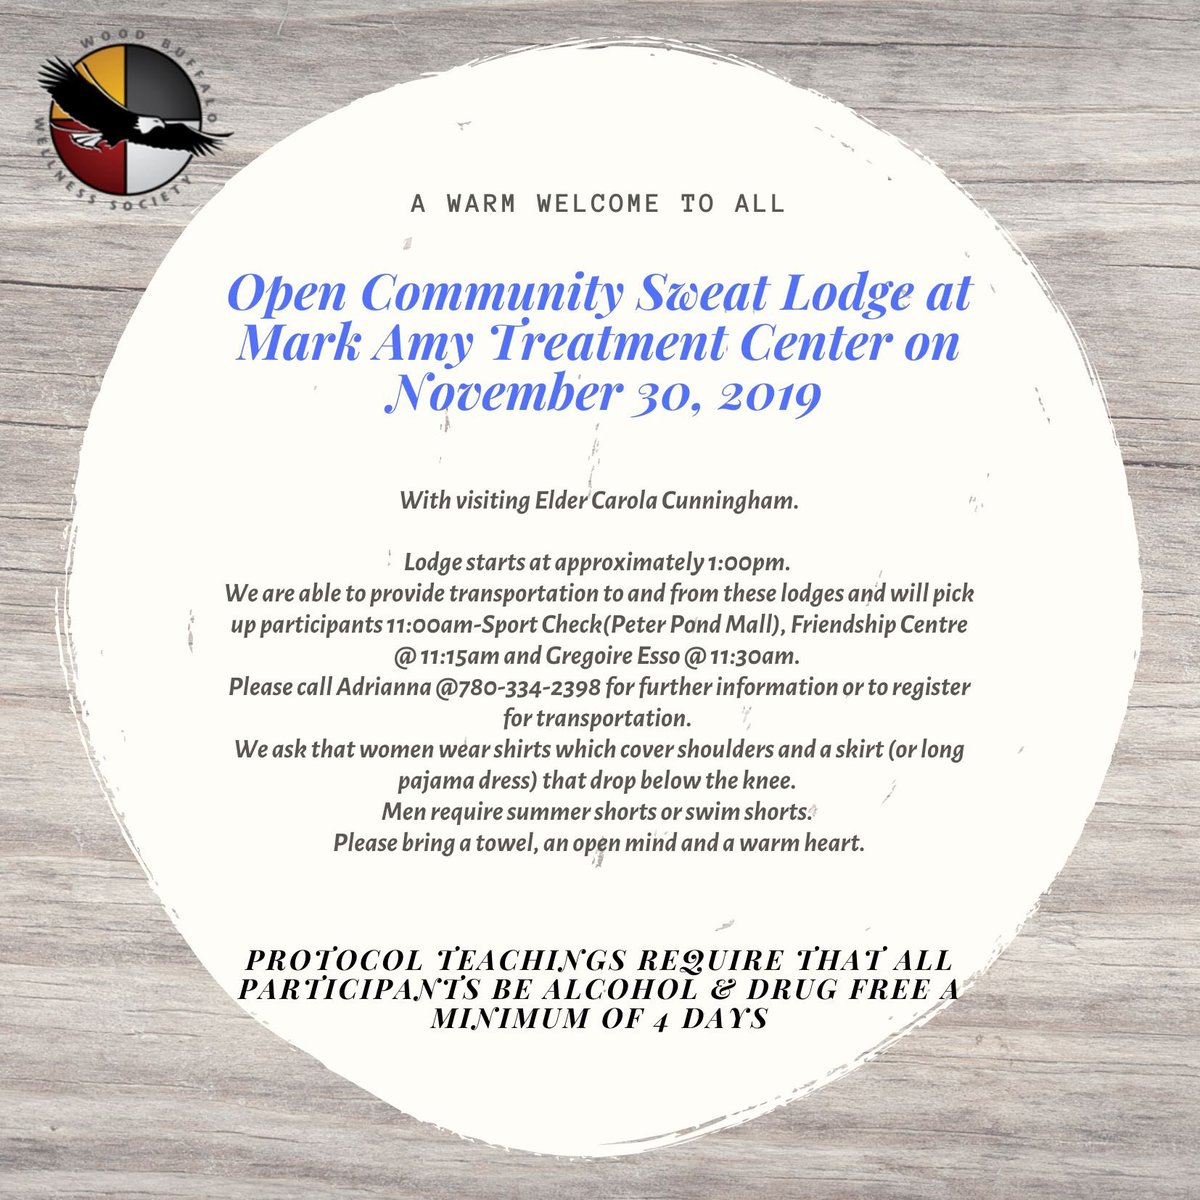 Open community sweat lodge this weekend! If interested or even just curious, come with an open mind and warm heart ❤️ #WBWS🦅 #culturesaveslives #ymm #ymmculture